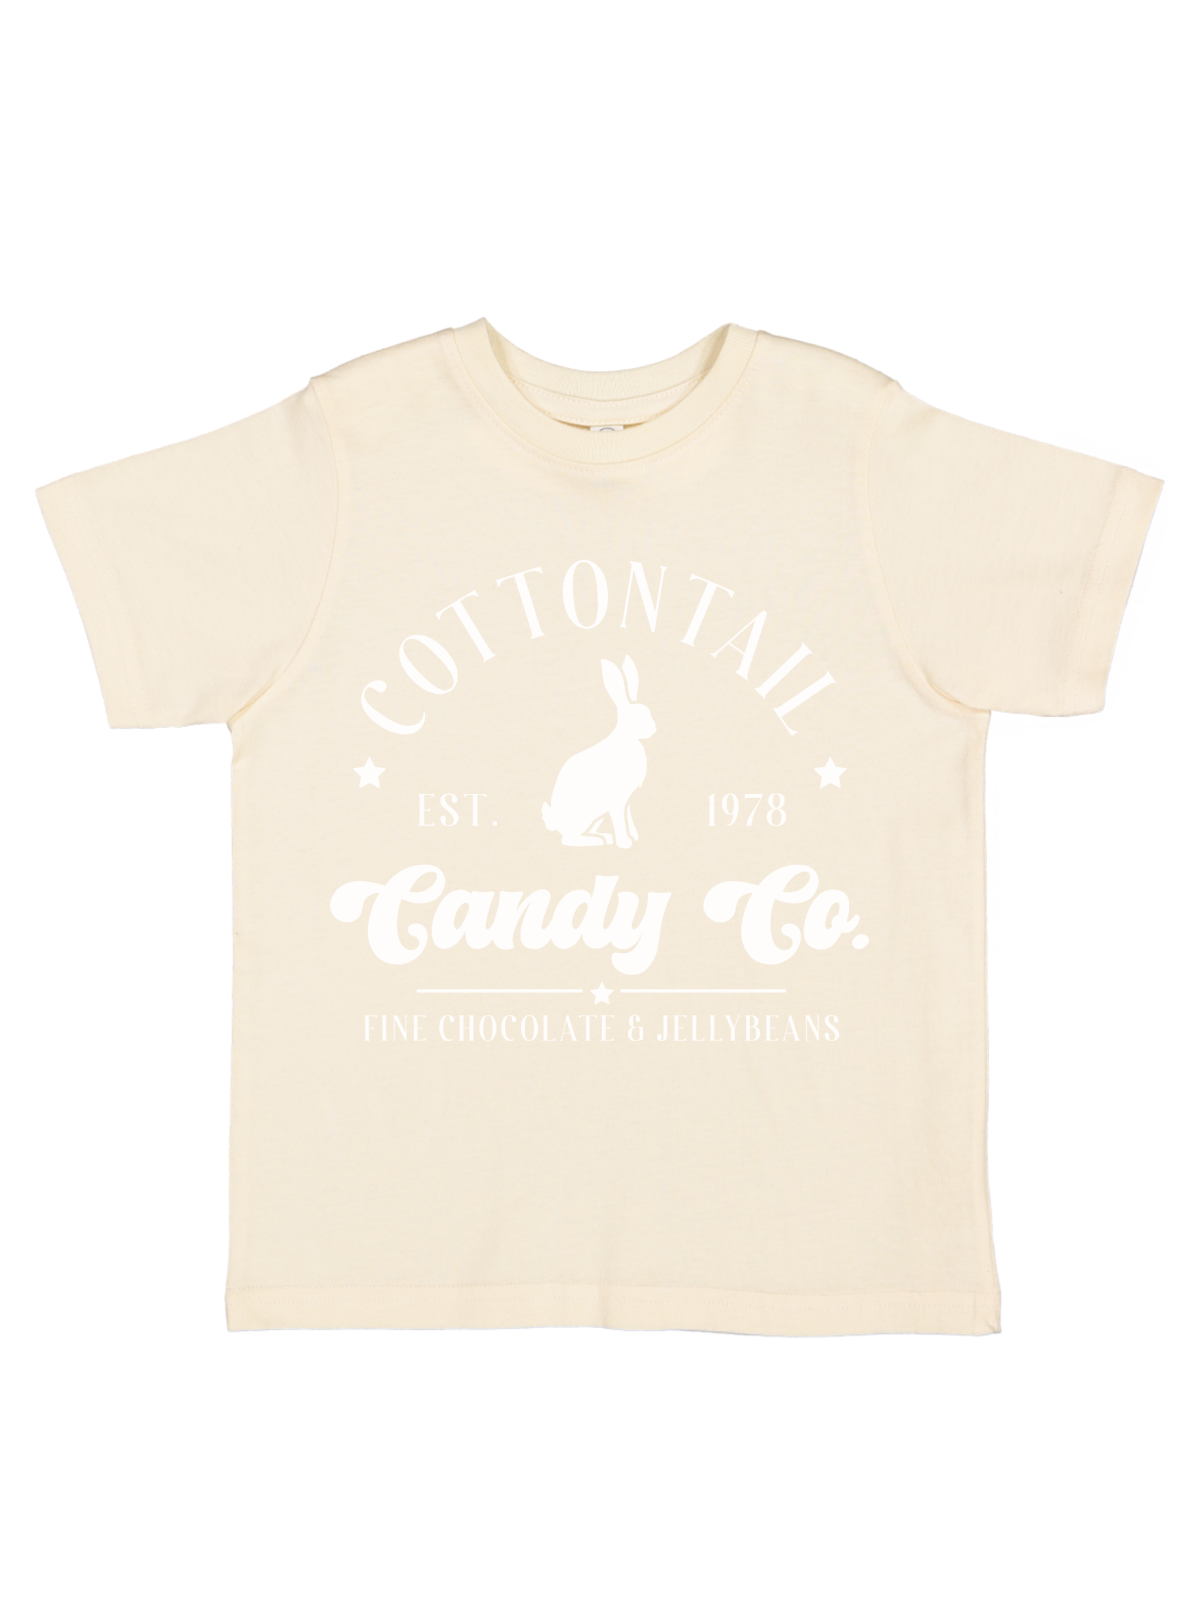 Cottontail Candy Co Kids Easter Shirt in Natural Tan